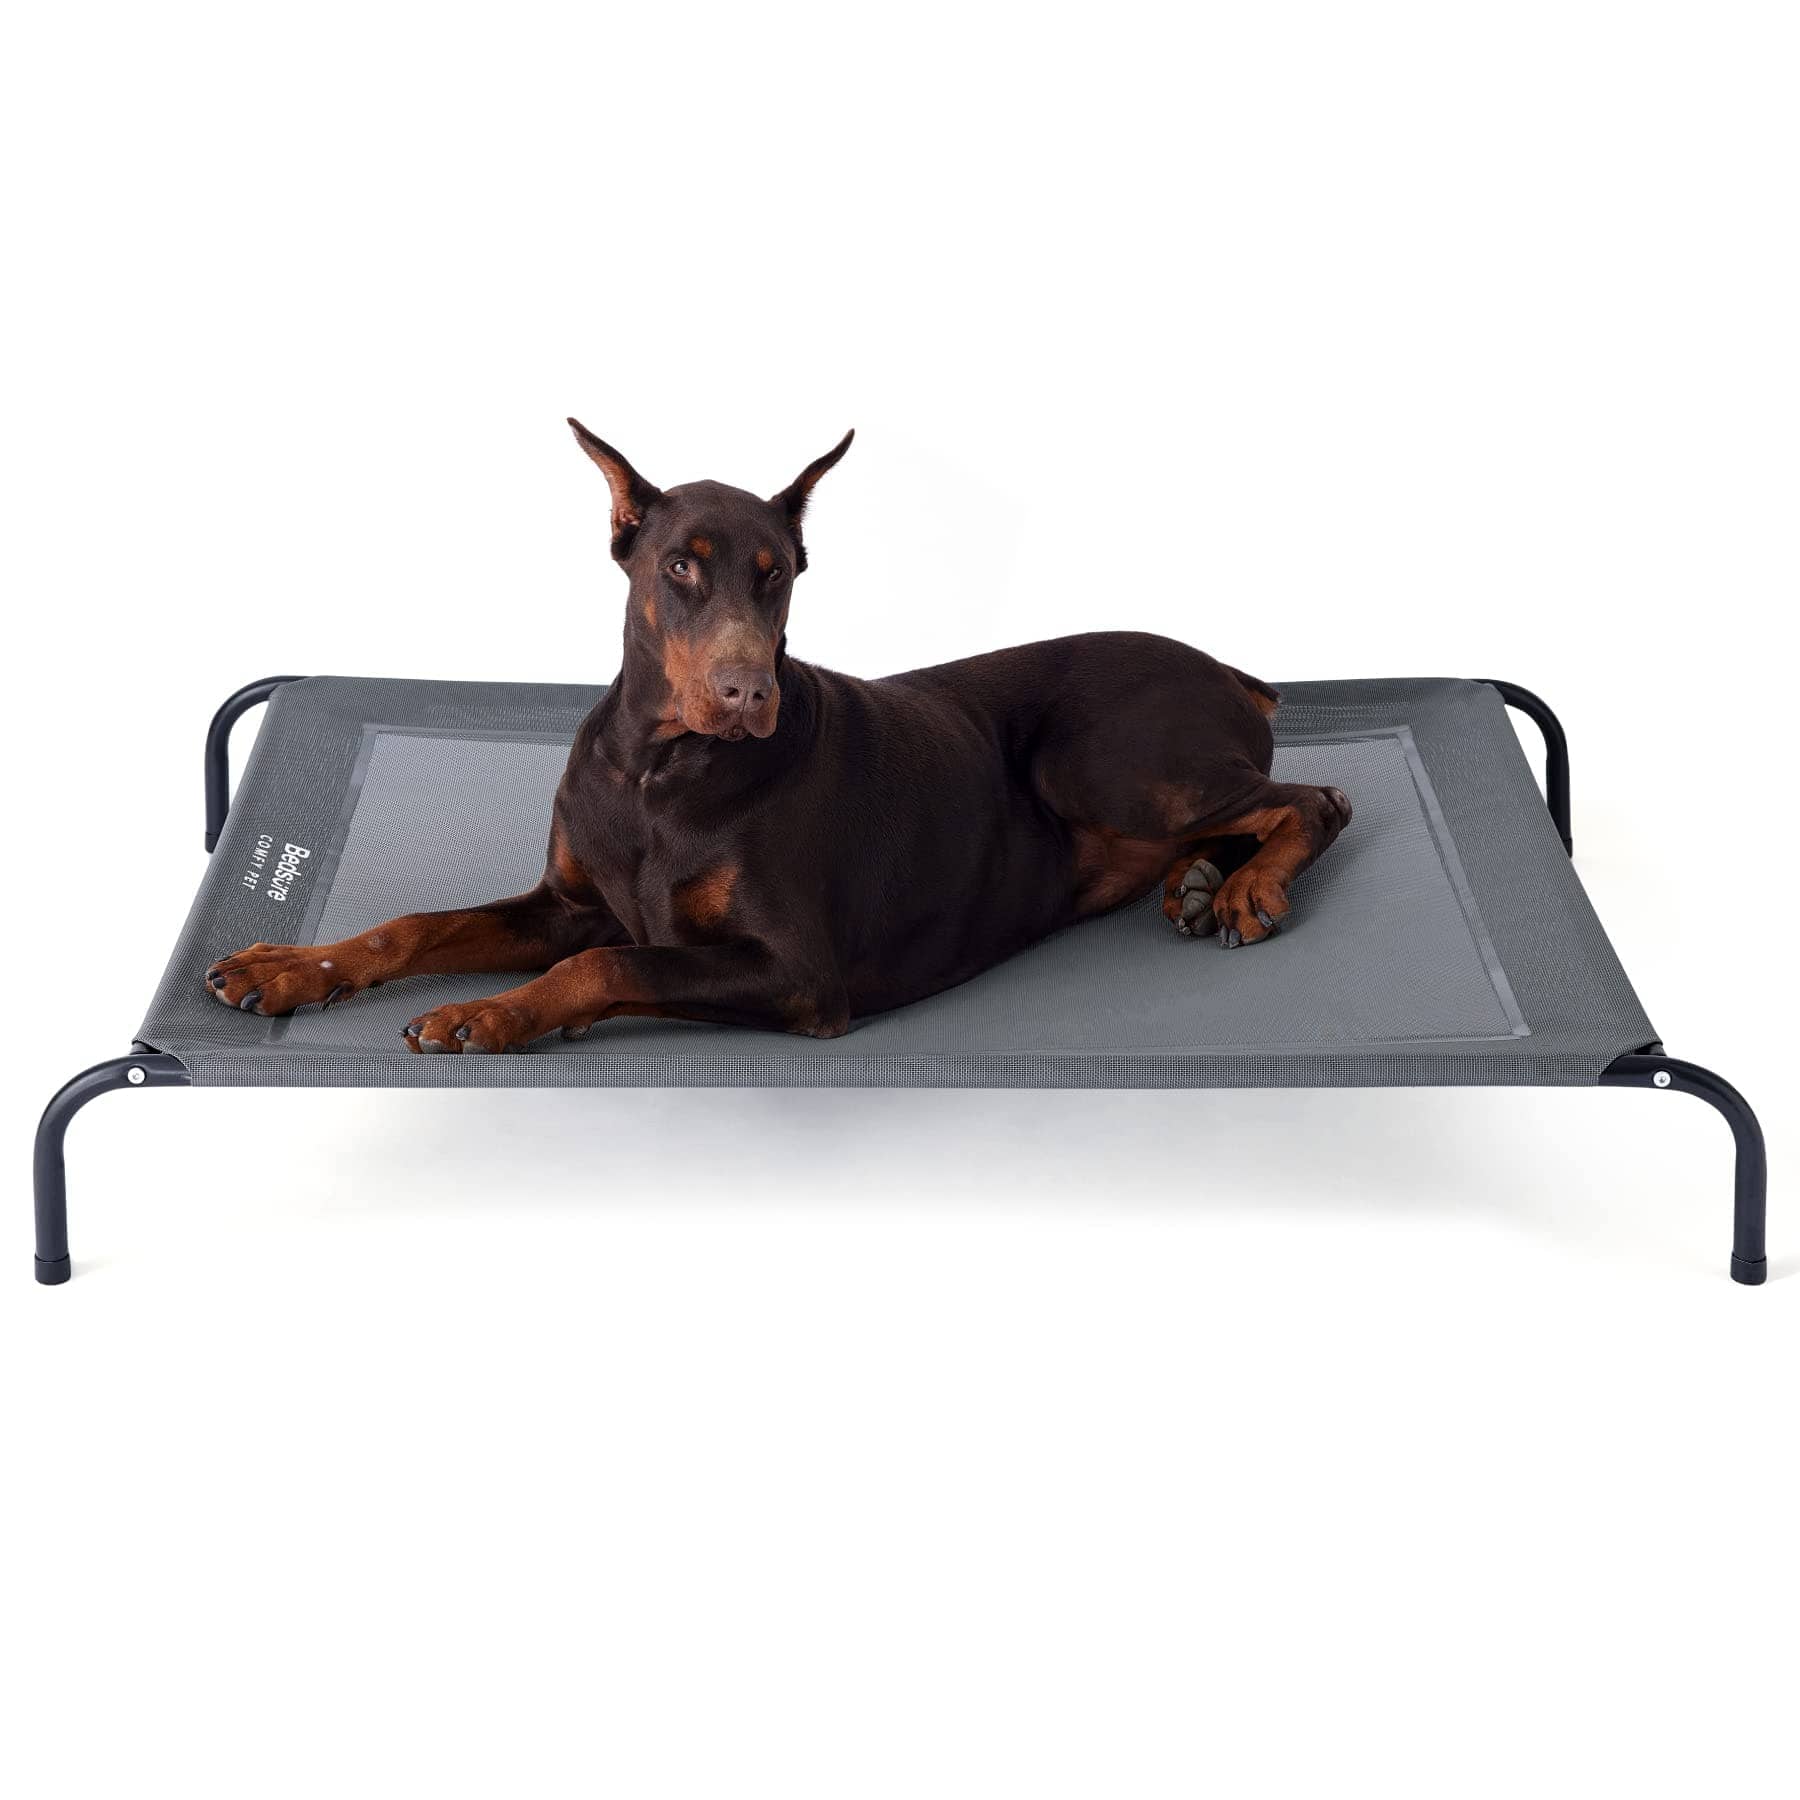 Bedsure Elevated Dog Bed - Brown